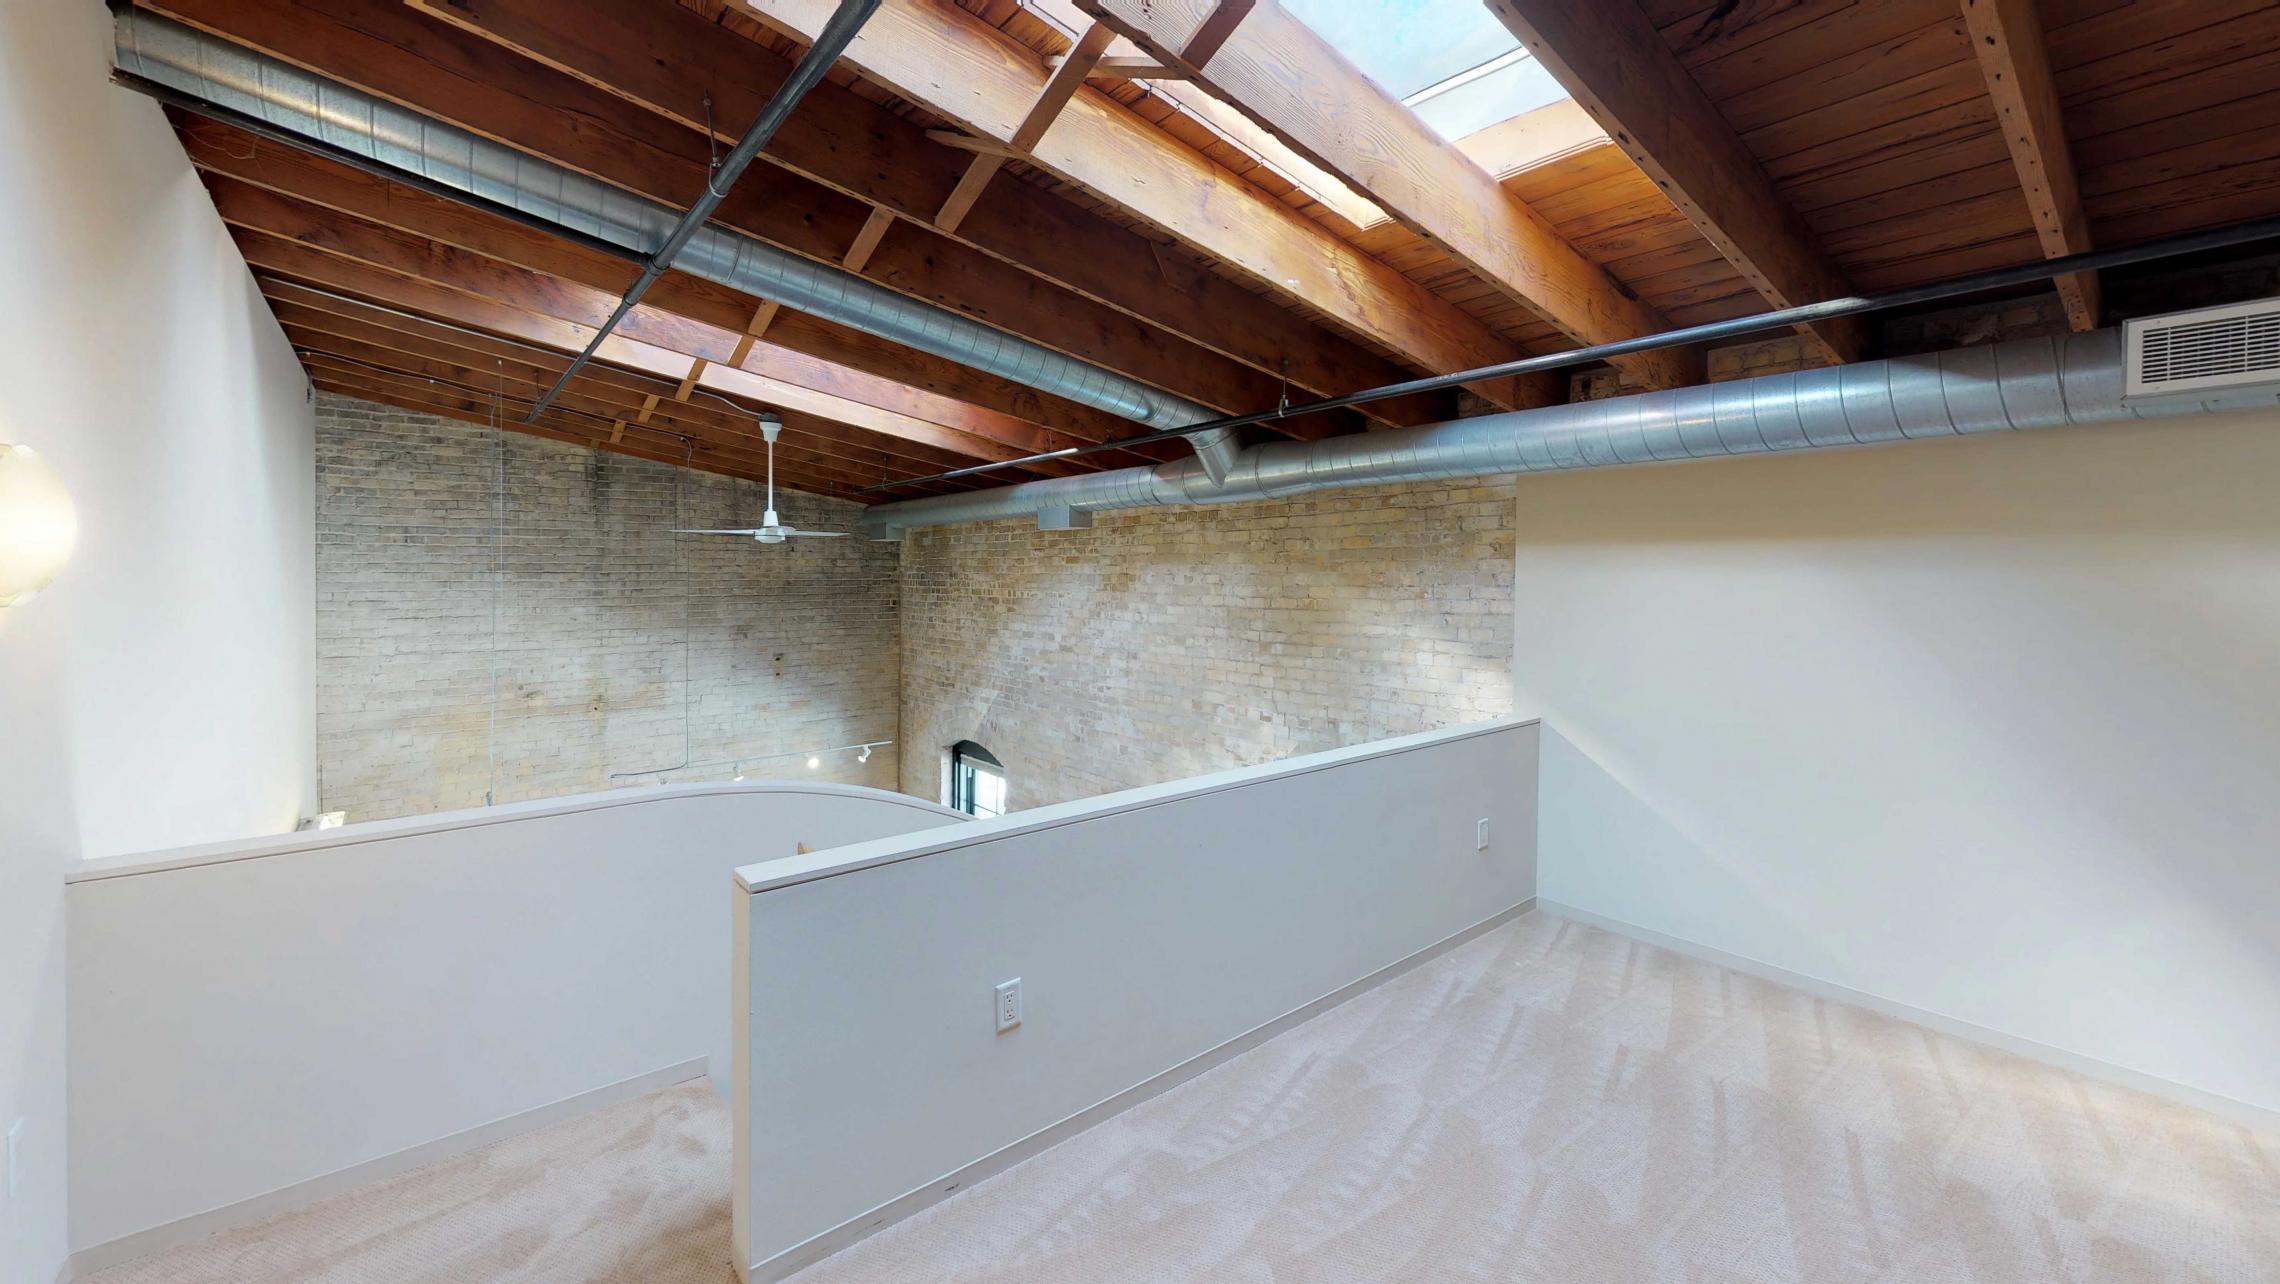 E307-Madison-Downtown-Lofted-Two-Bedroom-Vaulted-Ceiling-Exposures-Luxury-Skylight-Tobacco-Lofts